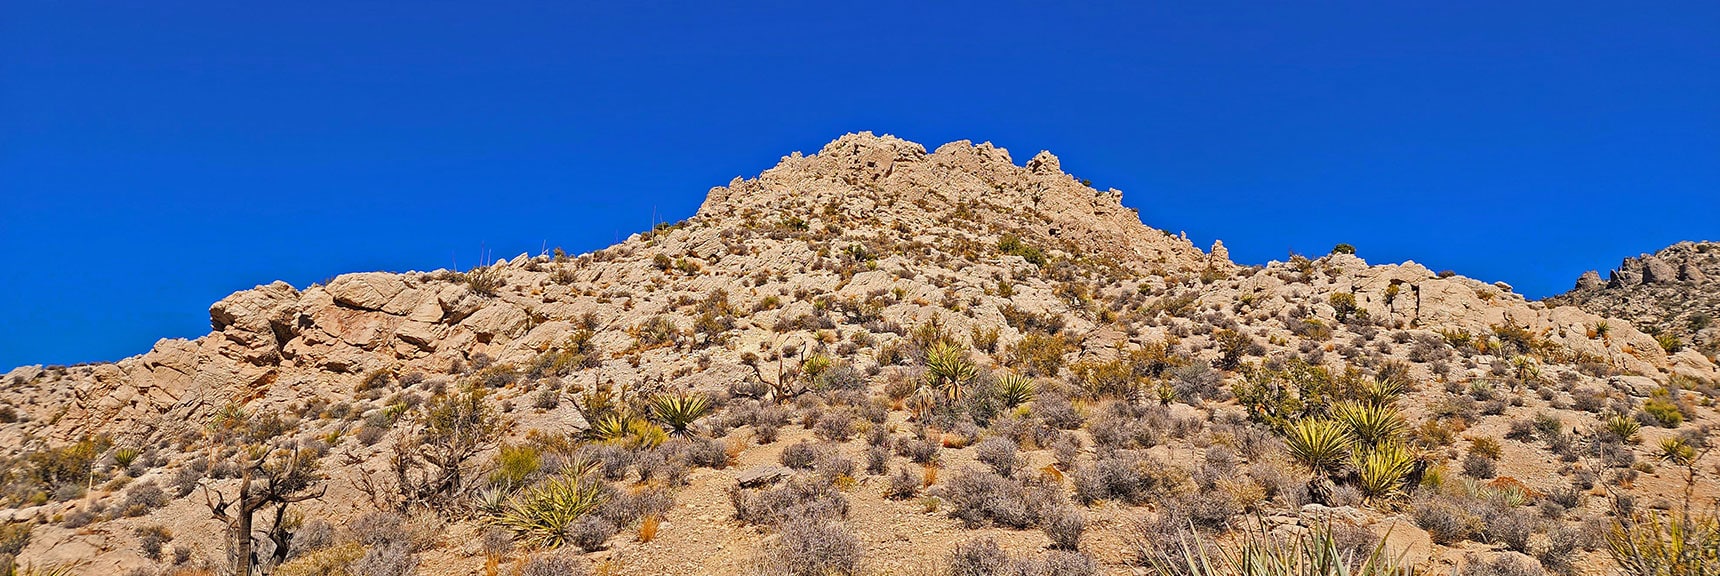 Alternate Route Will Circle Left Side of Hill to Reach High Center of Ridgeline | Turtlehead Peak | Red Rock Canyon National Conservation Area, Nevada